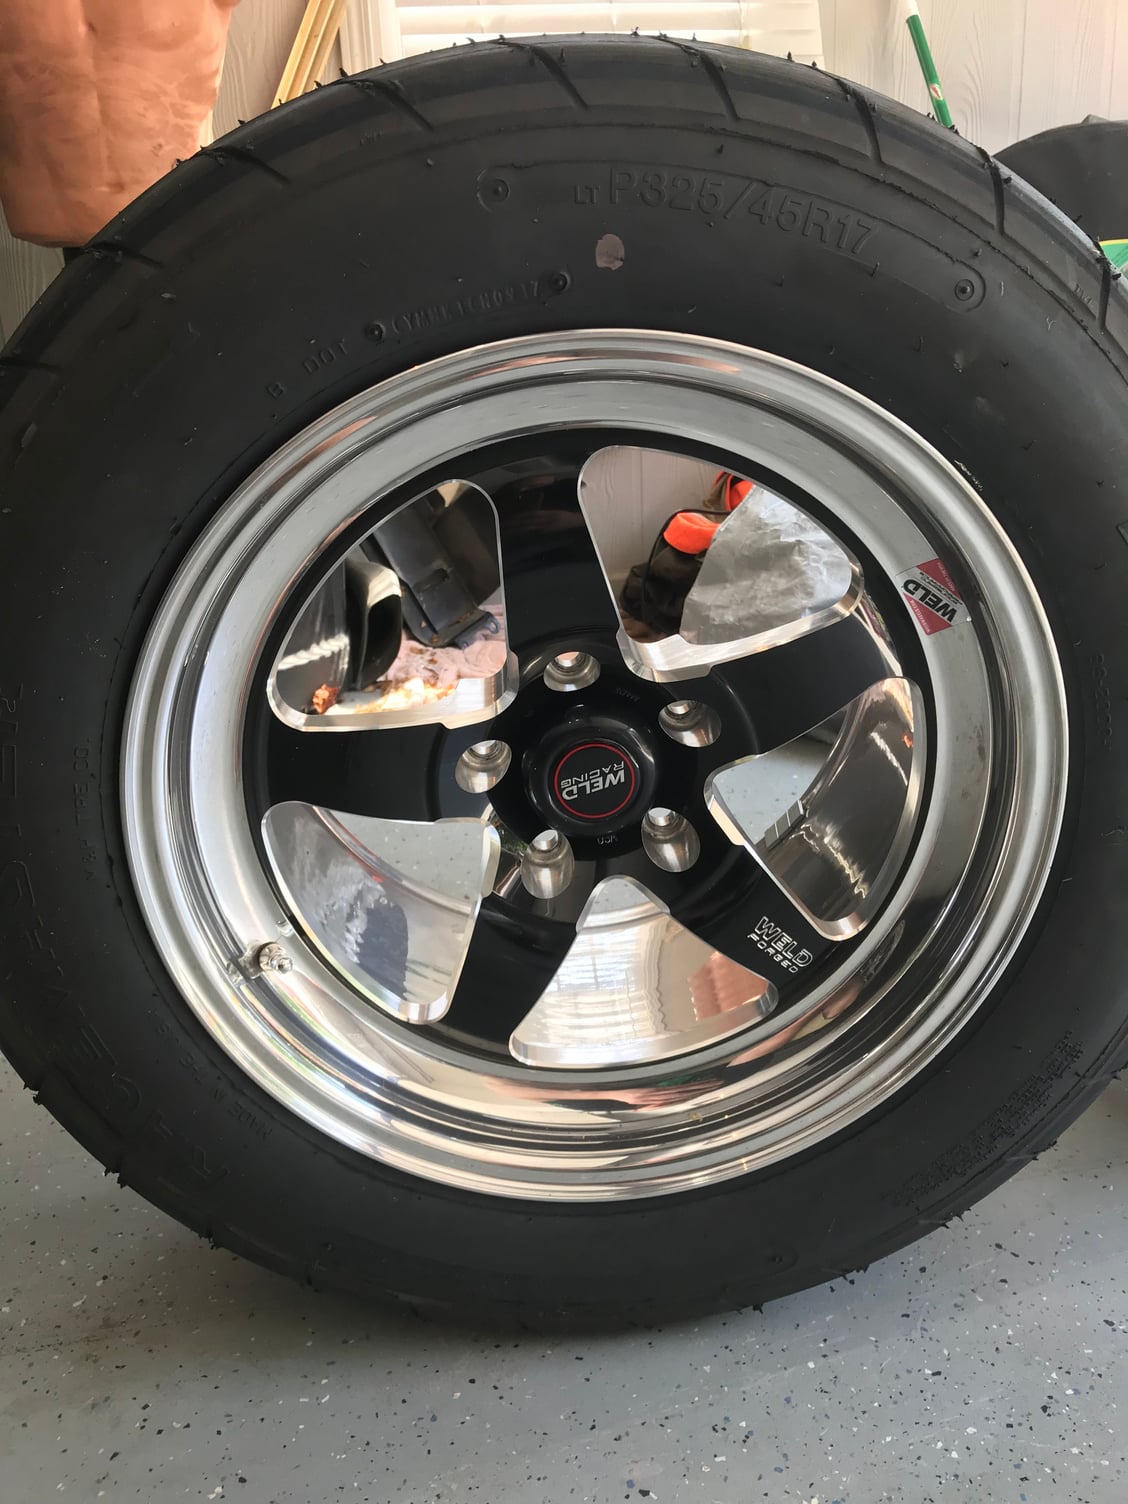 FS (For Sale) (NC) weld rts 17x11 and 325/45/17 M&H racemaster radial ...